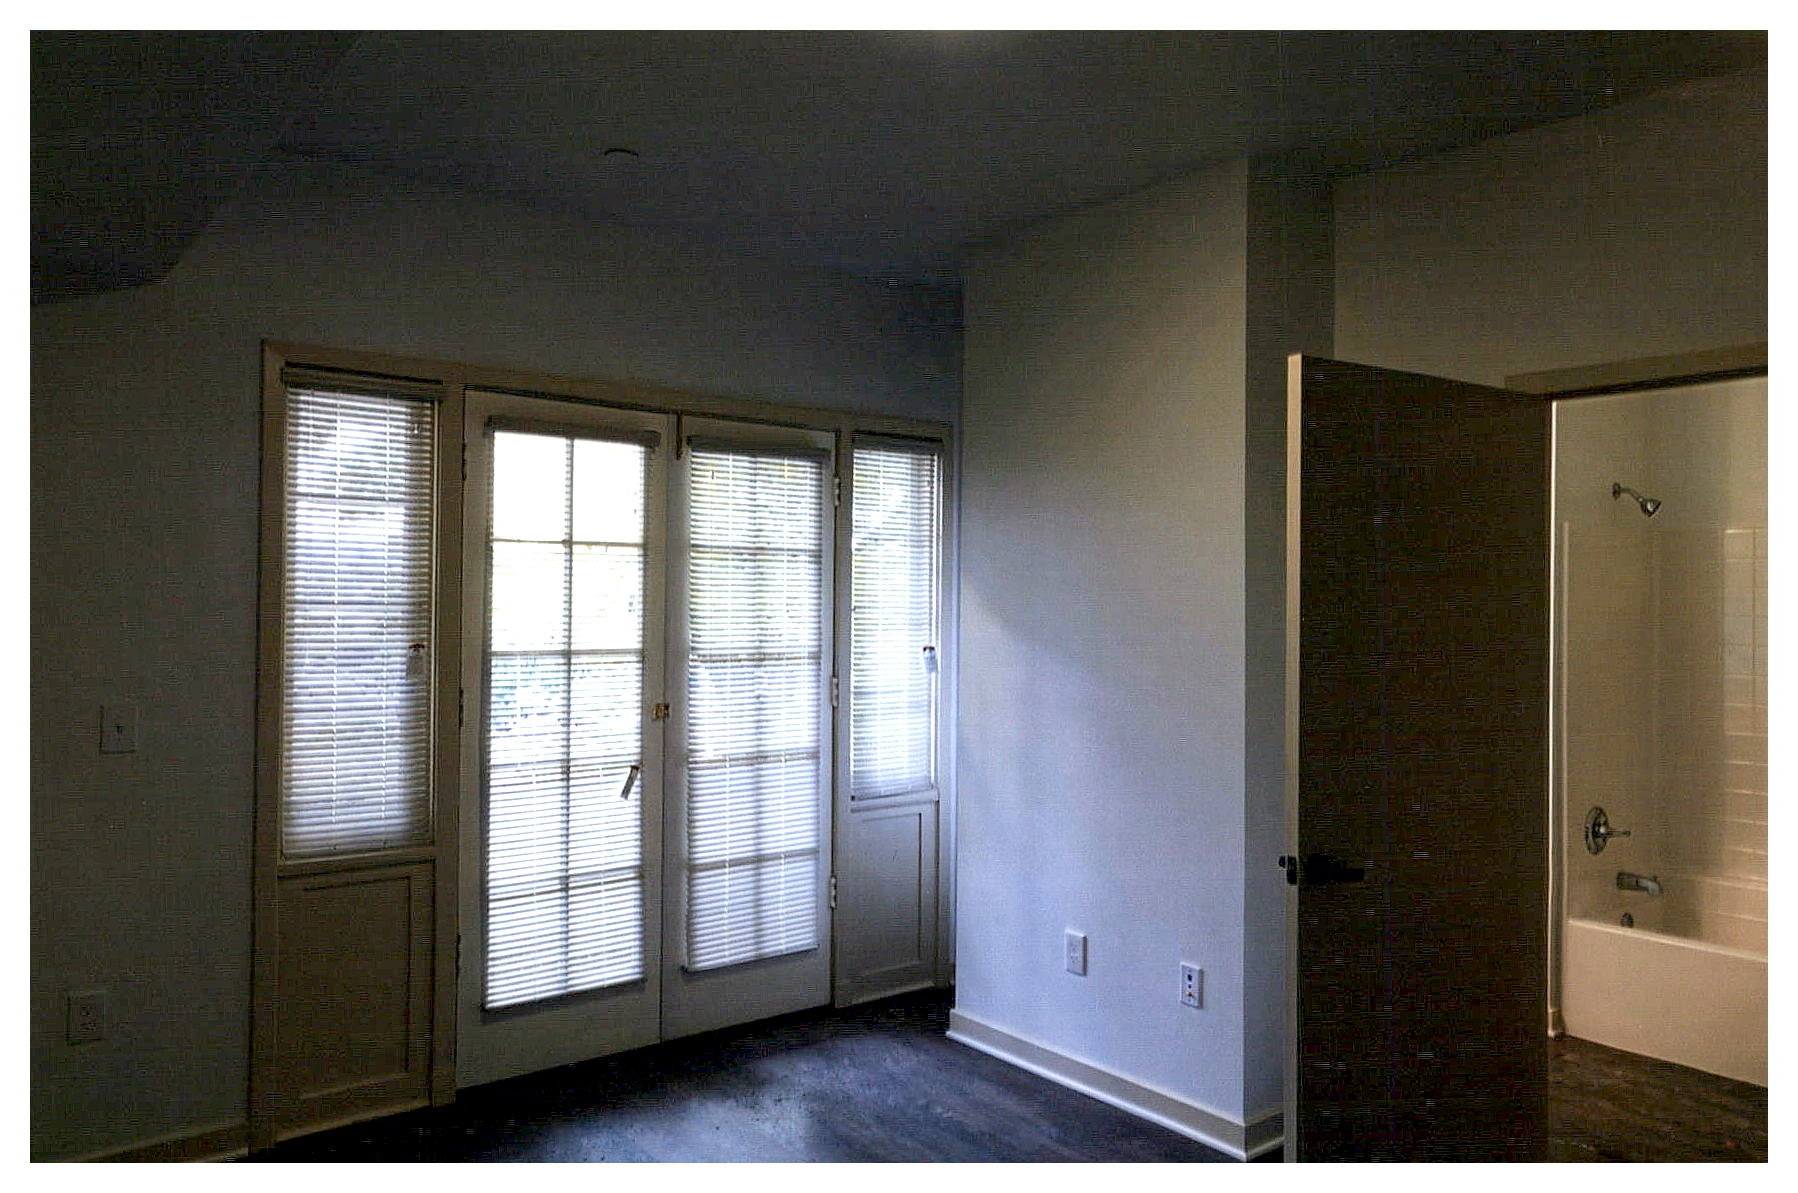 After: interior view of apartment showing entrance to bathroom and restored paired french doors and sidelites to outside.